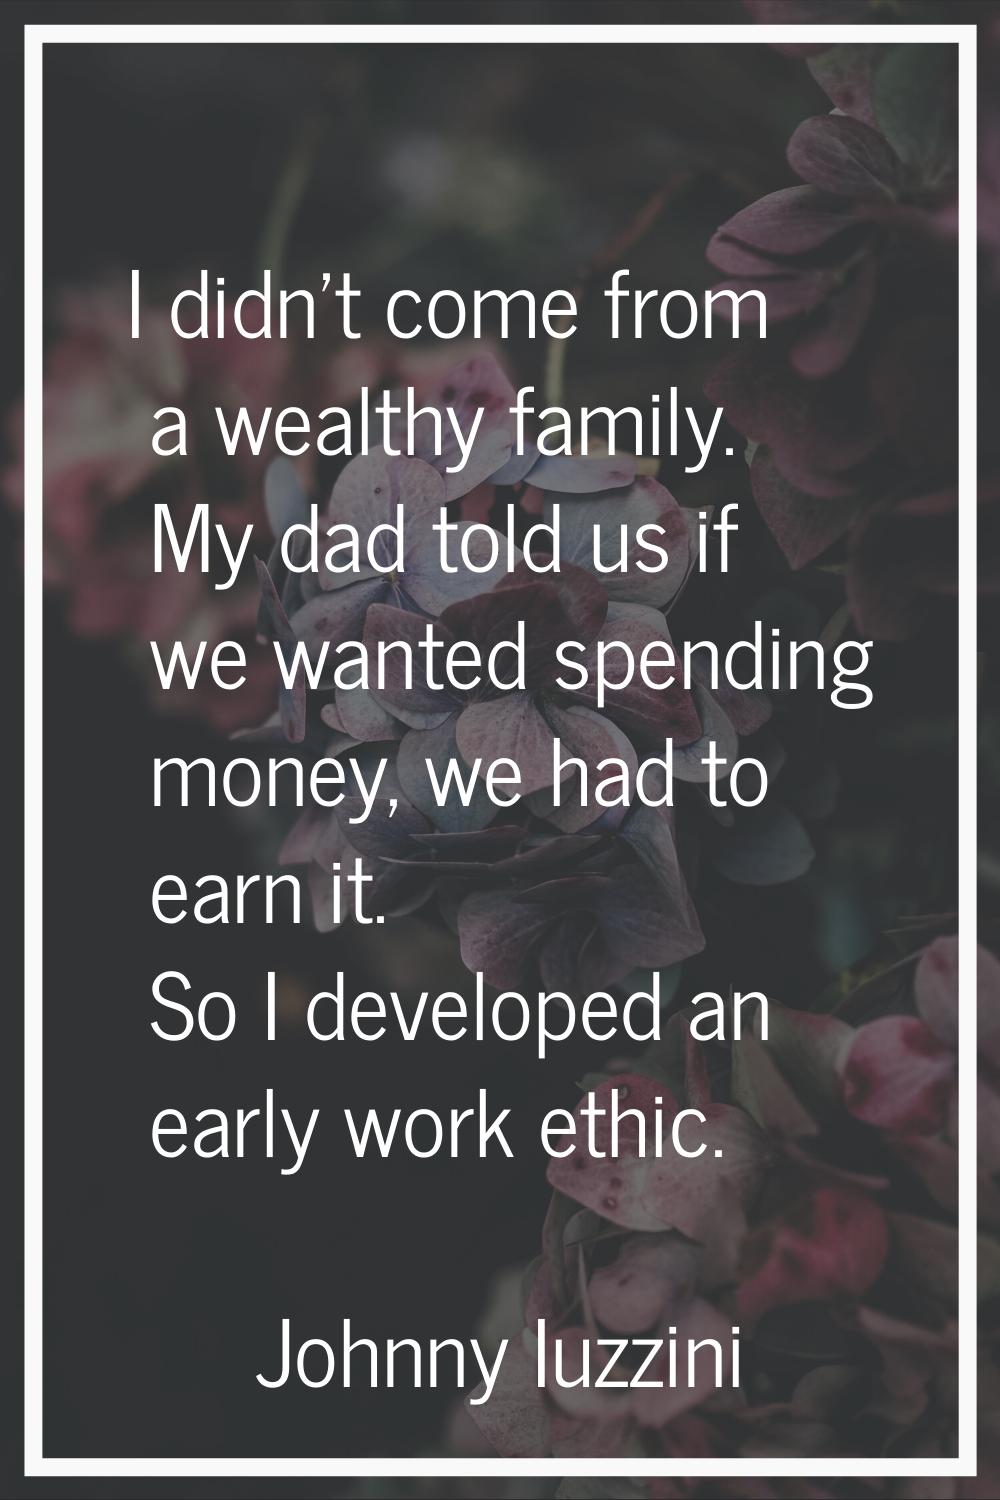 I didn't come from a wealthy family. My dad told us if we wanted spending money, we had to earn it.